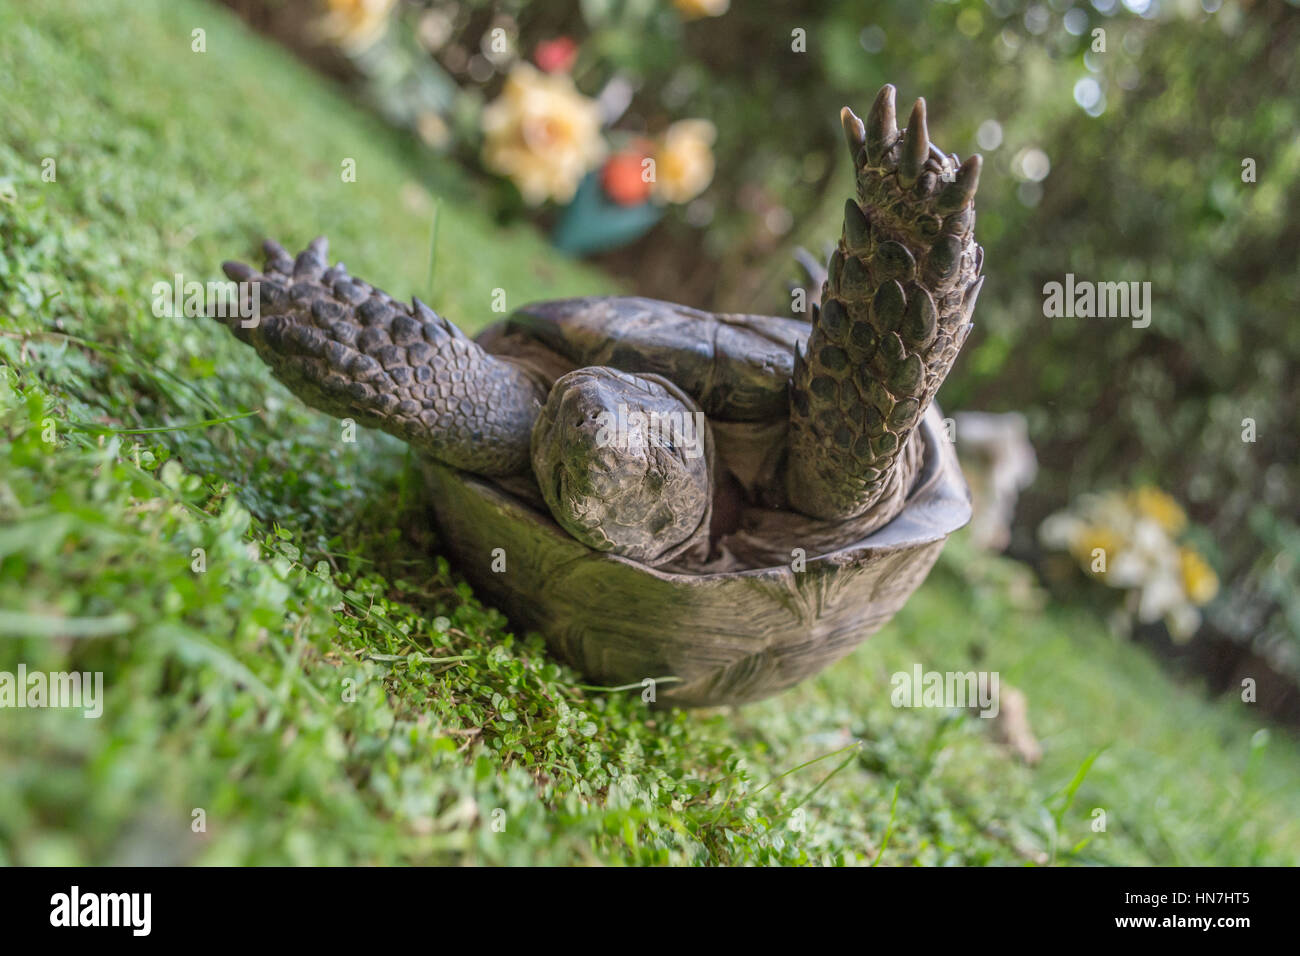 Turtle strugling to turn on her feet Stock Photo